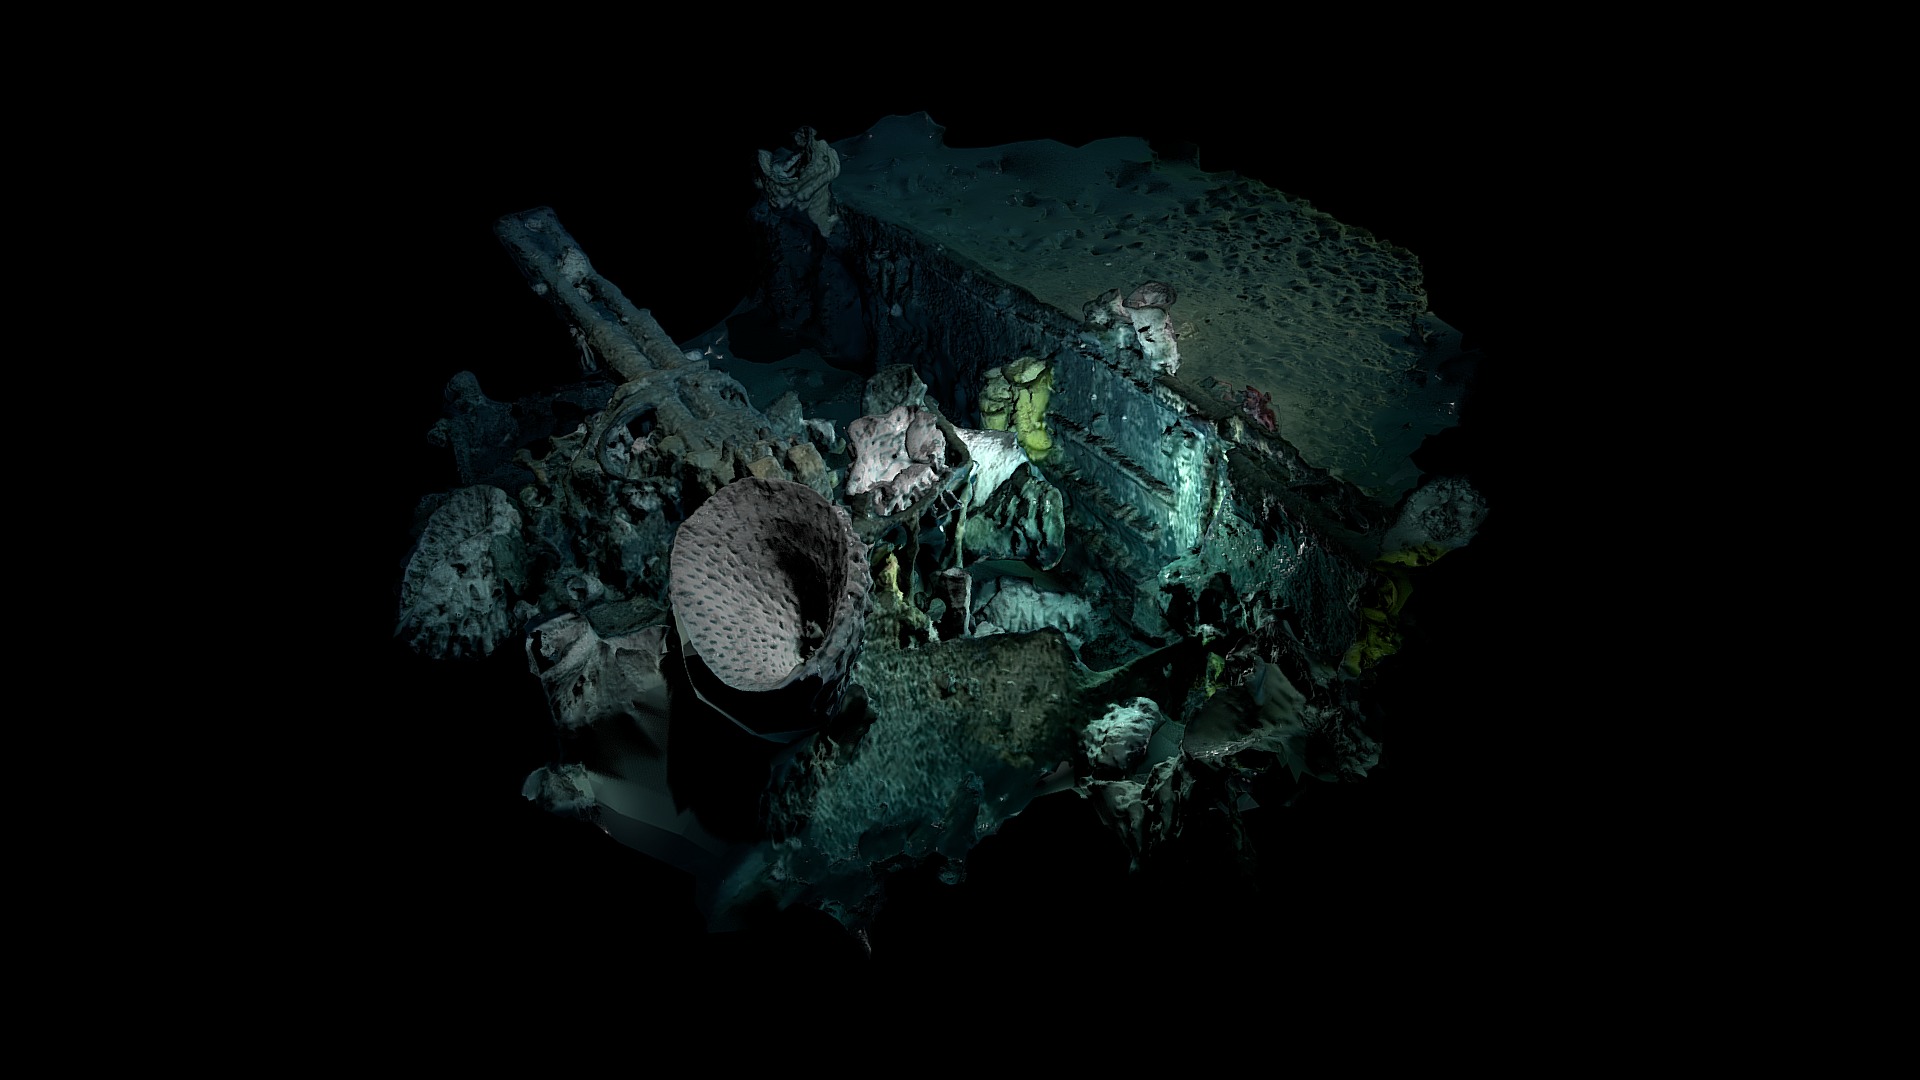 3D model Low Poly Deep Sea Shipwreck #2 - This is a 3D model of the Low Poly Deep Sea Shipwreck #2. The 3D model is about a log with a face carved into it.